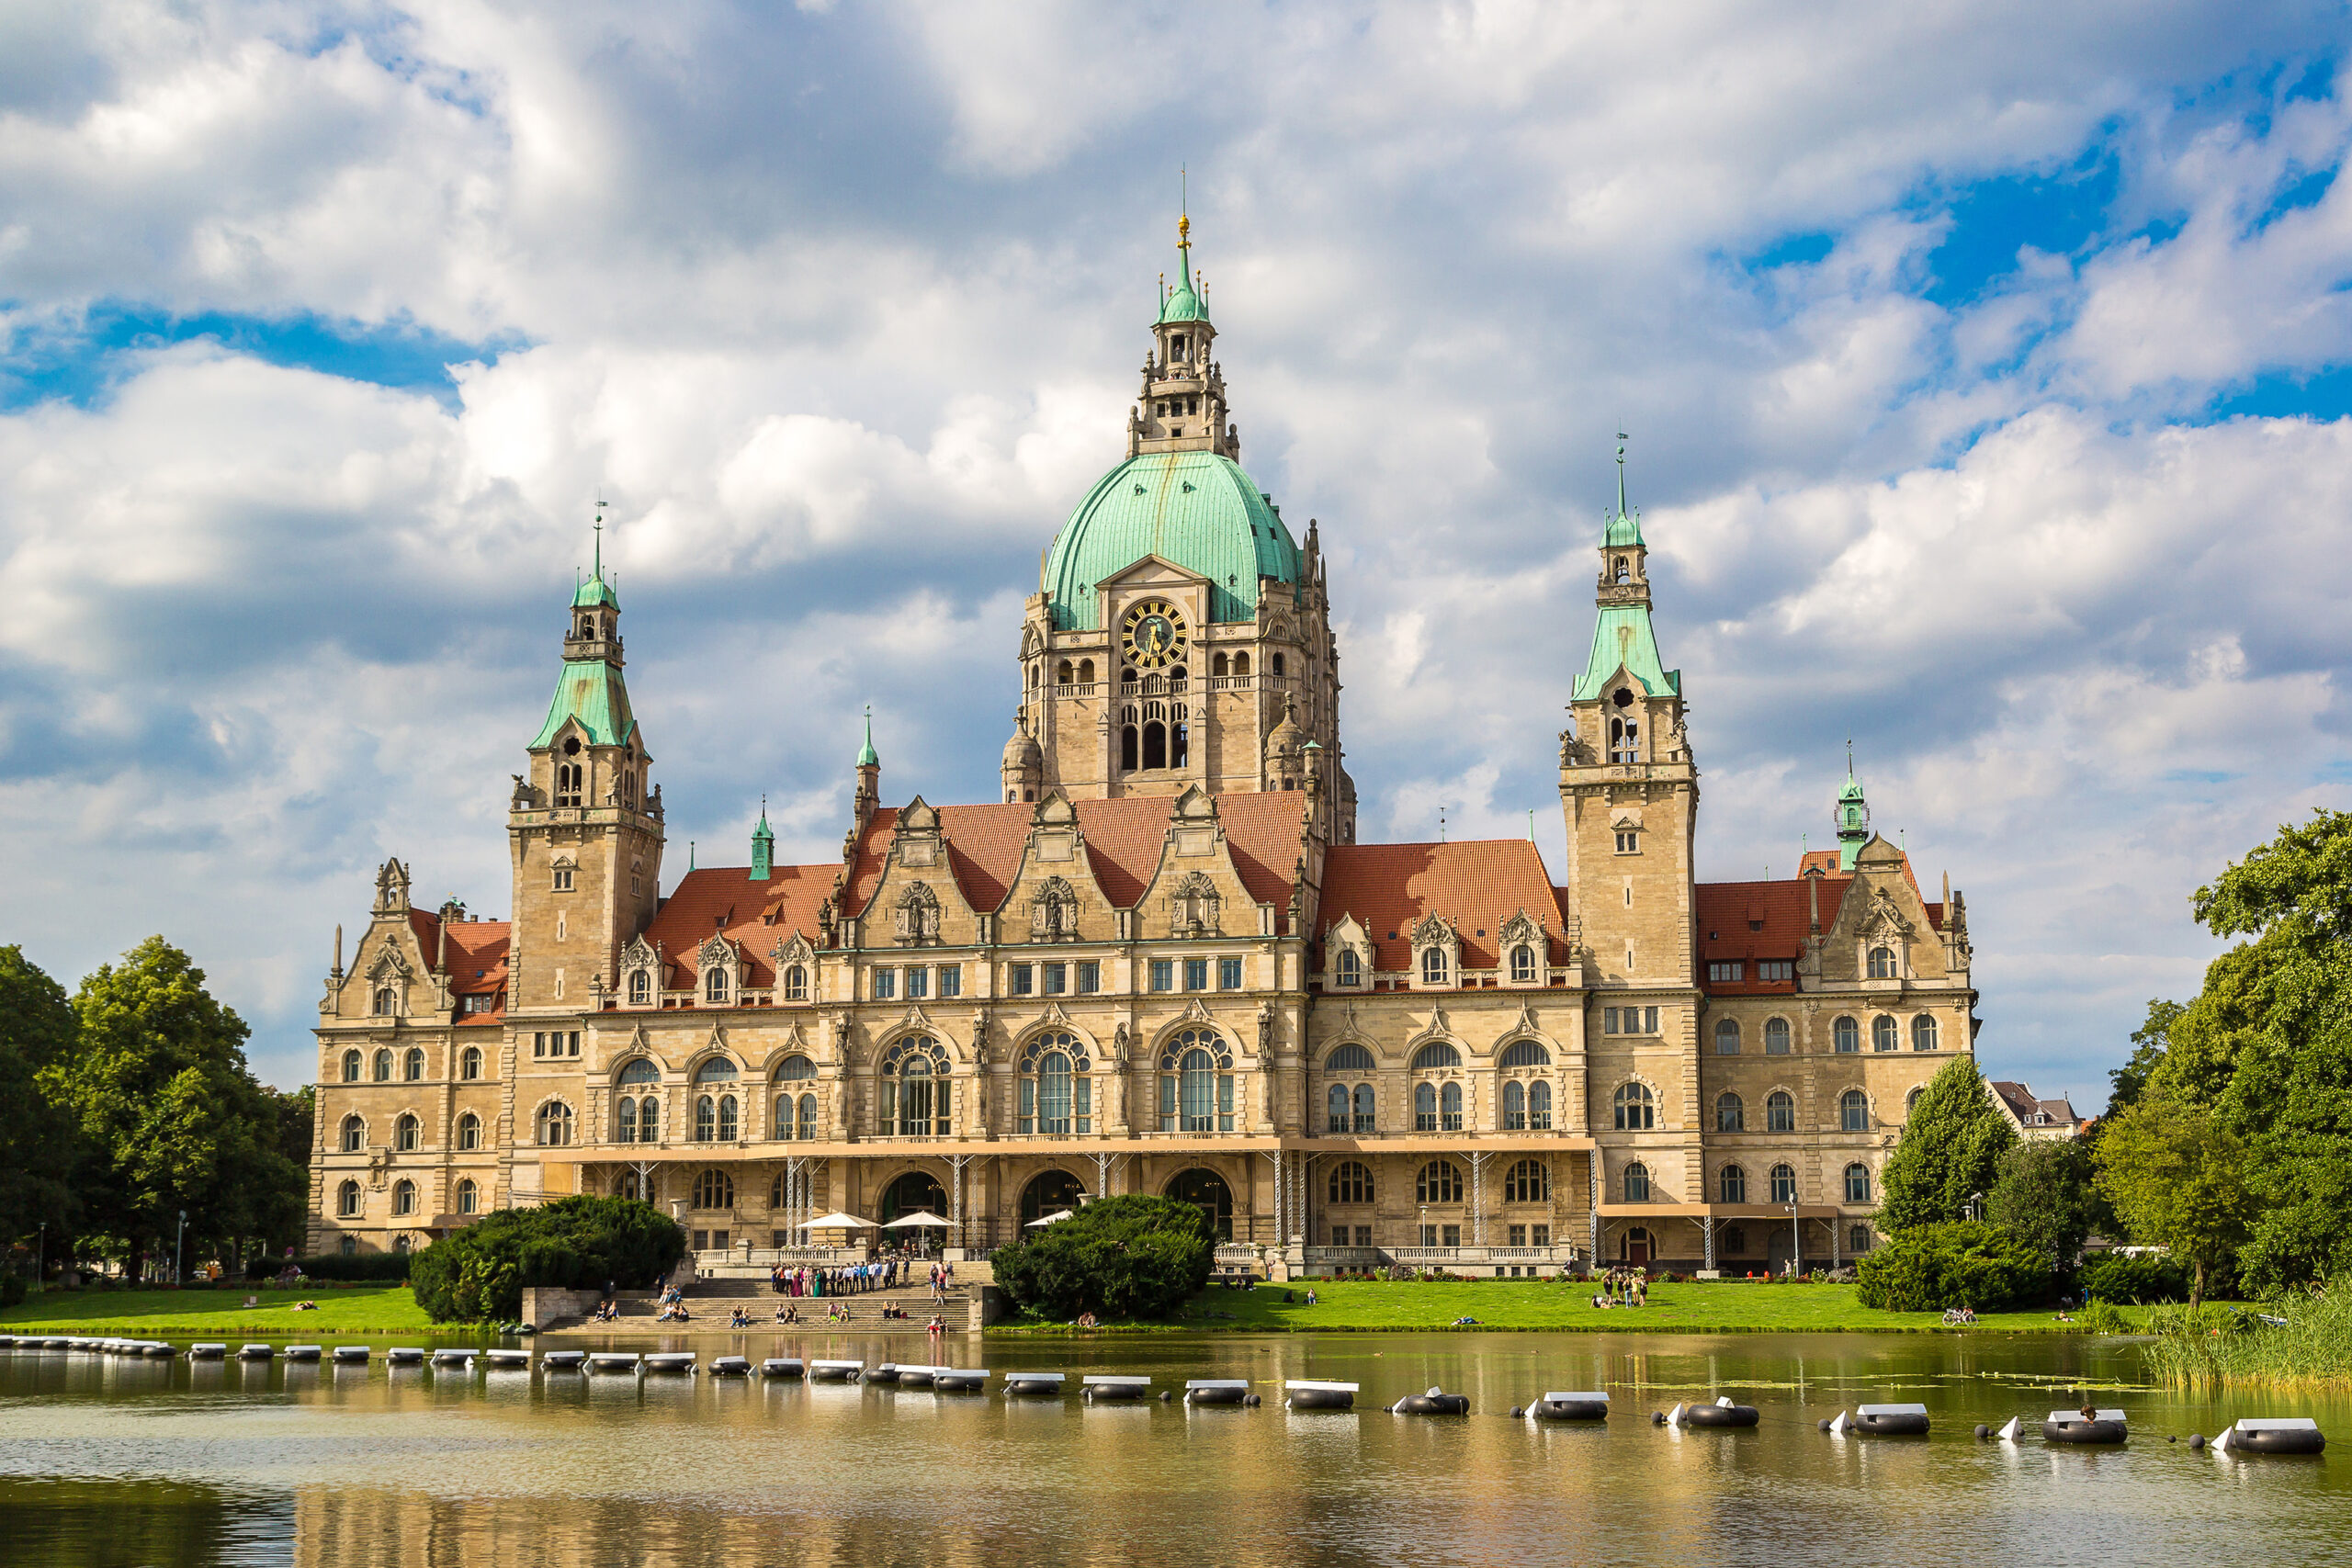 Hannover neues Rathaus